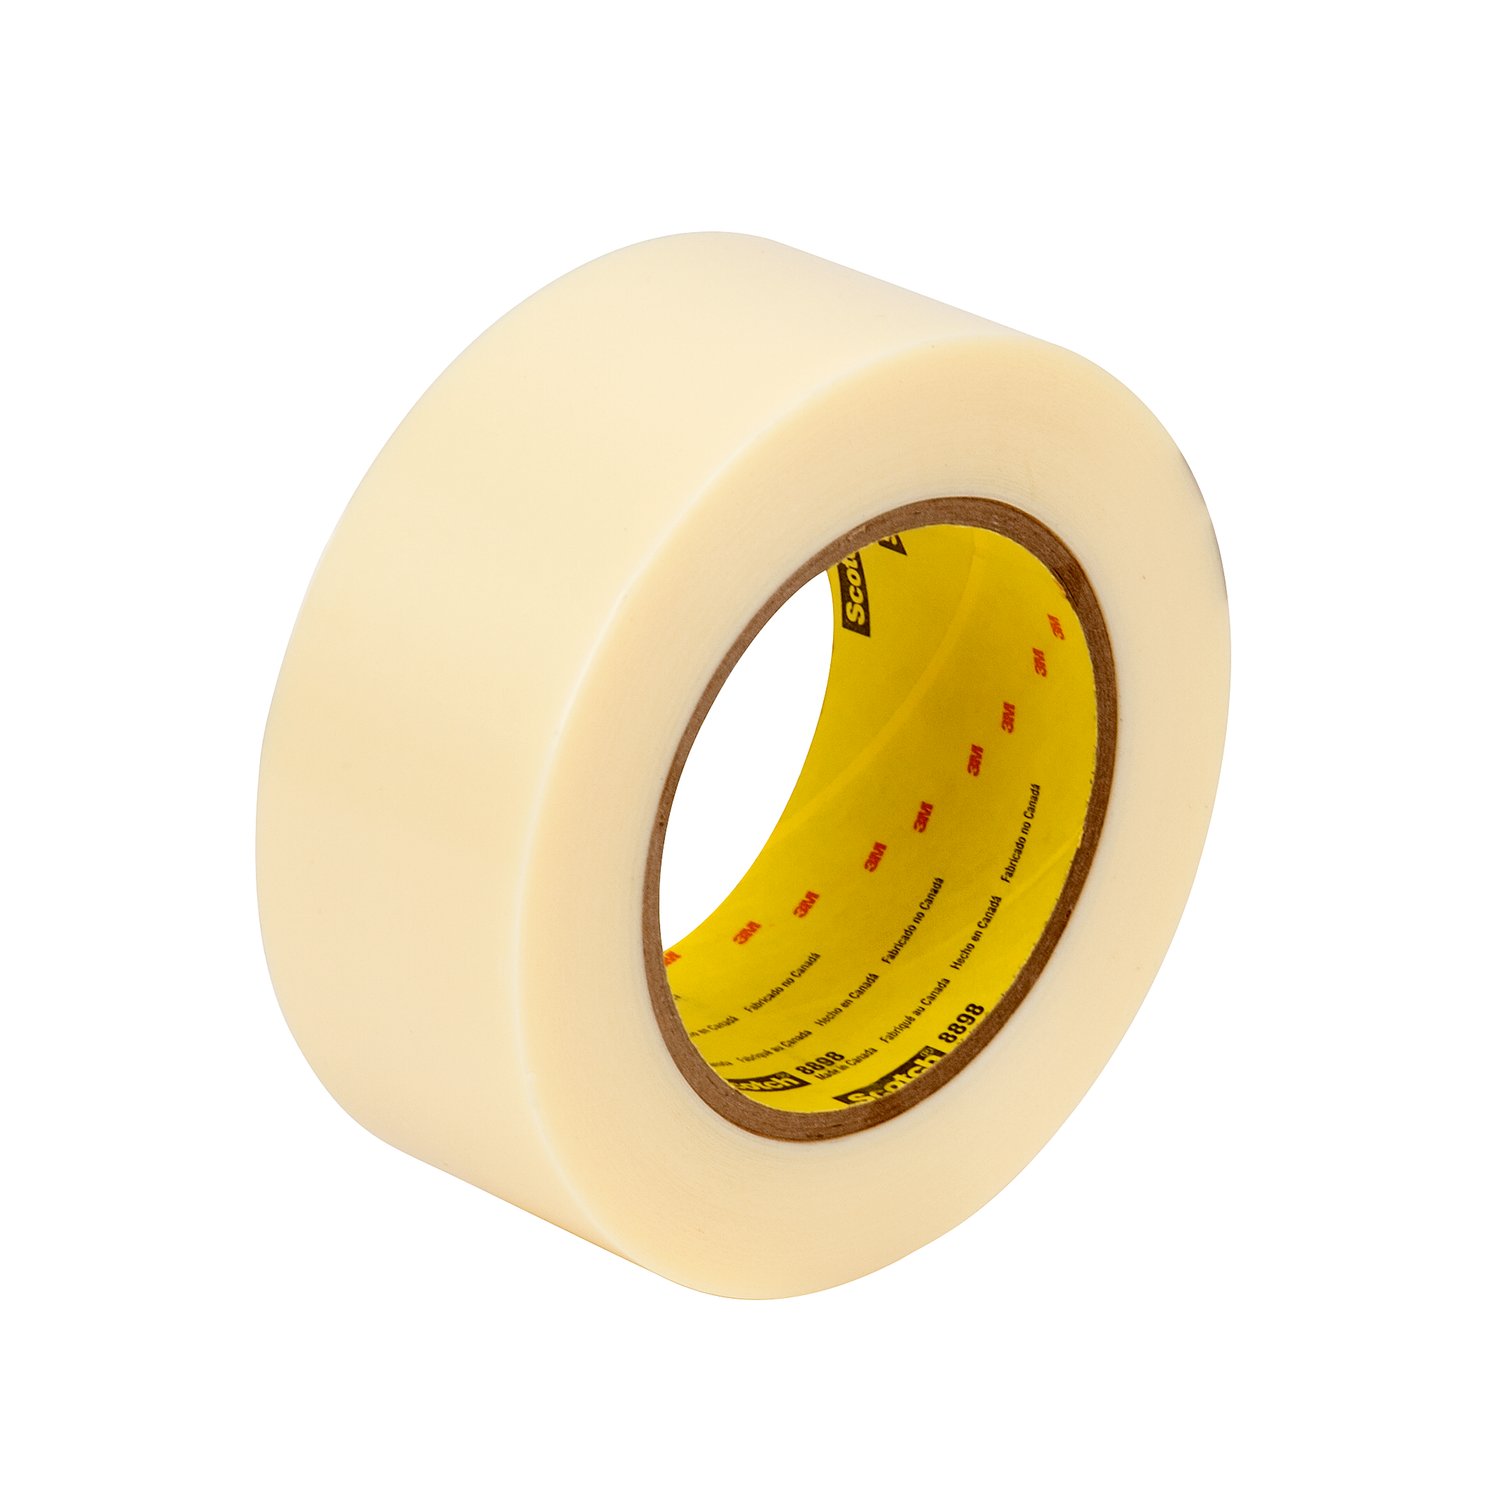 7000123958 - Scotch Strapping Tape 8898, Ivory, 72 mm x 55 m, 4.6 mil, 12 rolls per
case